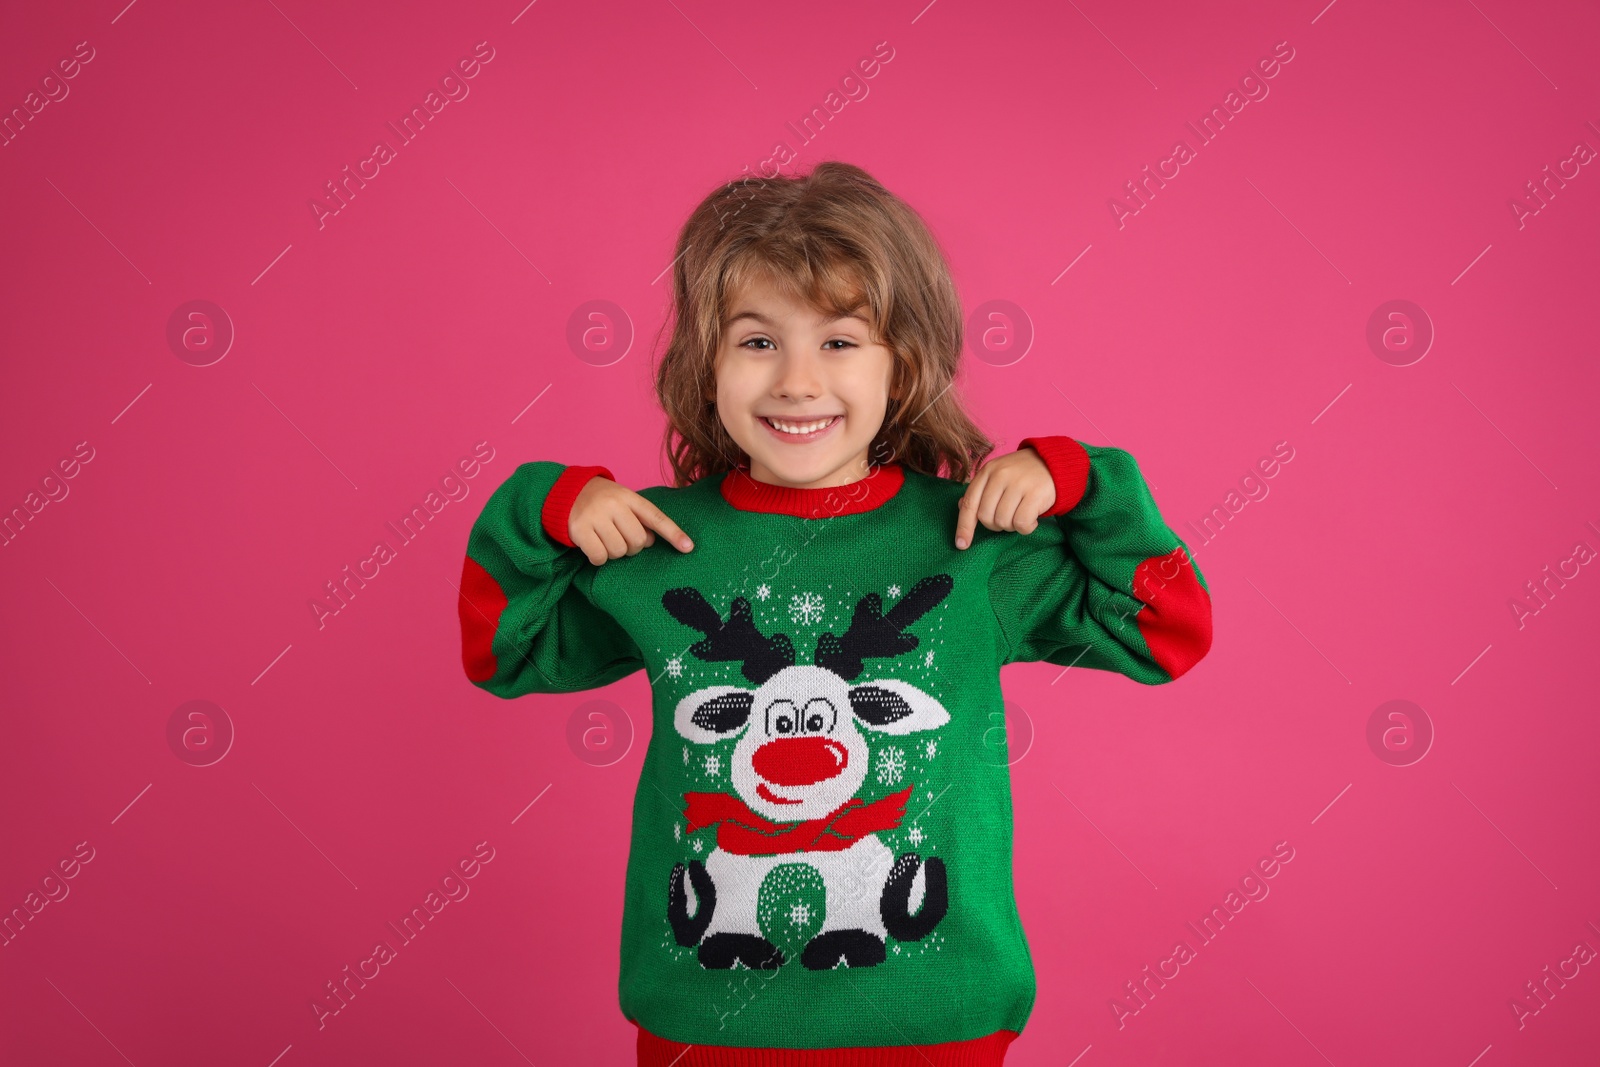 Photo of Cute little girl pointing at her green Christmas sweater against pink background